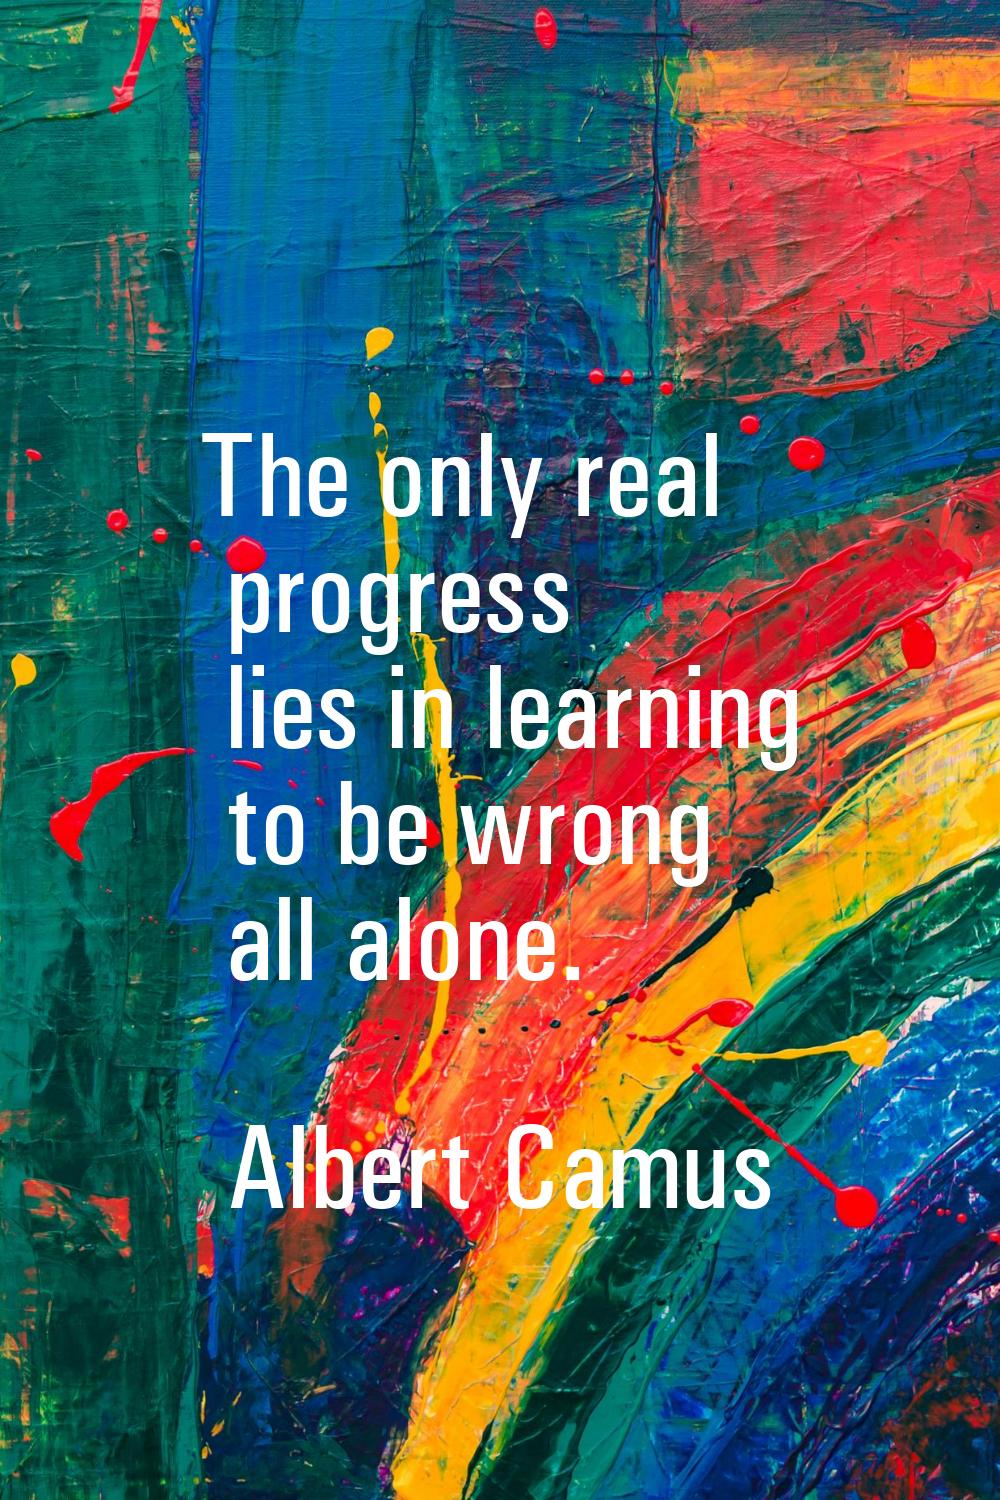 The only real progress lies in learning to be wrong all alone.